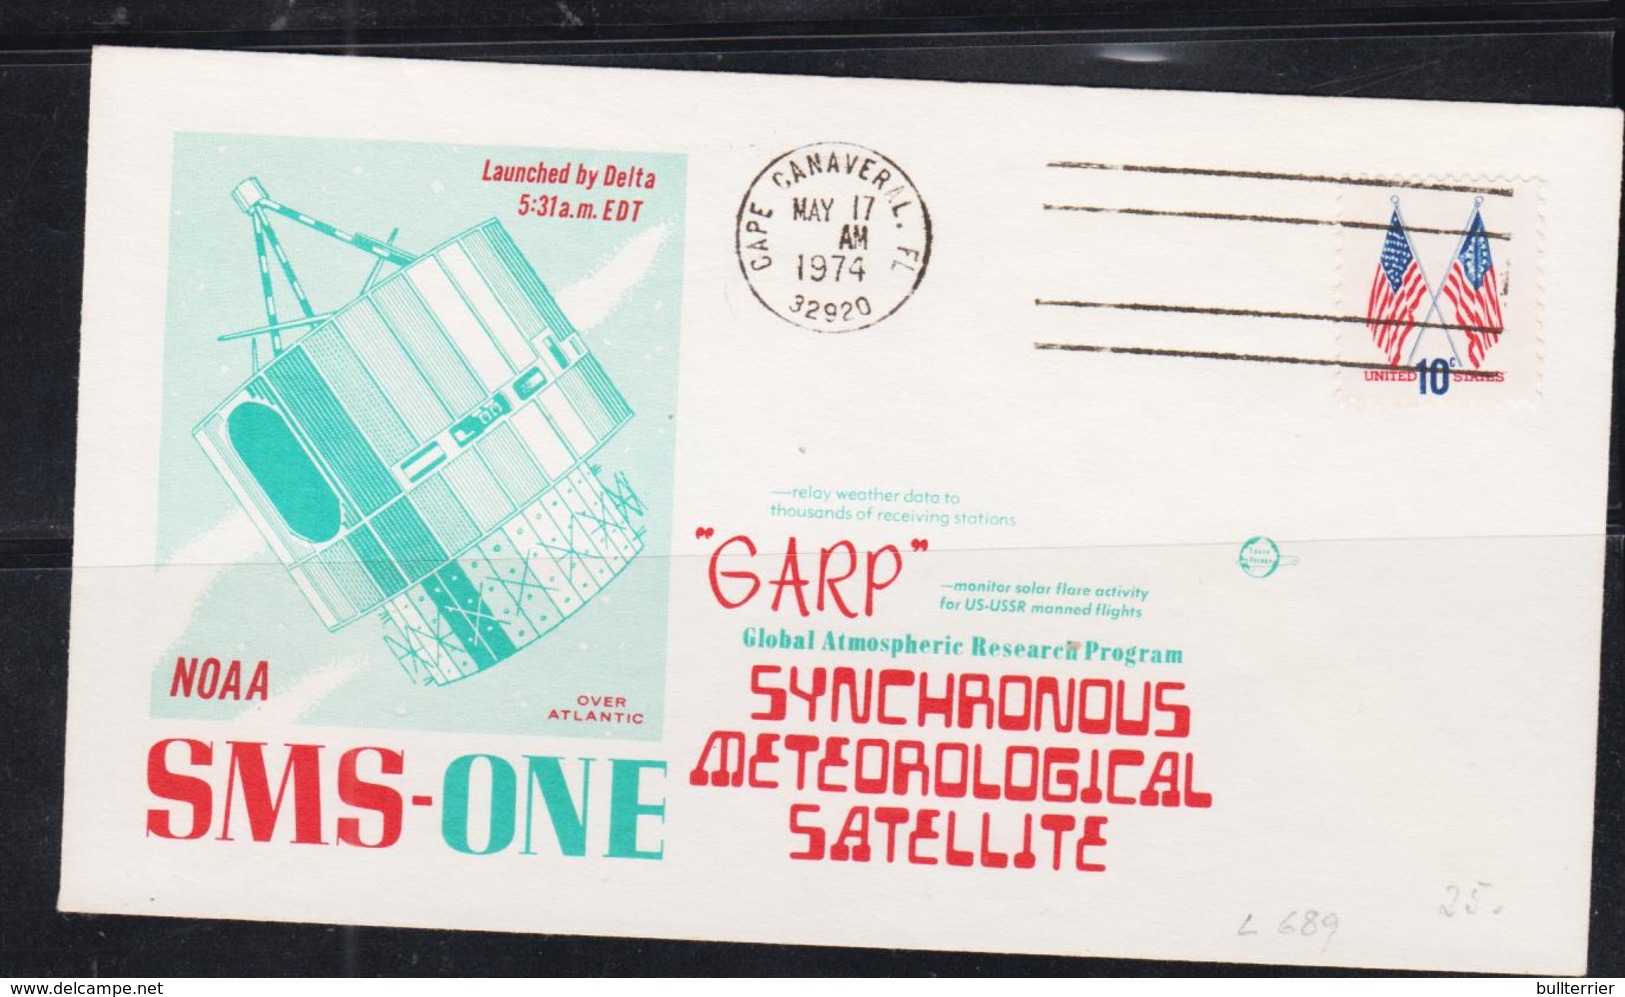 SPACE  - USA-  1974-  GARP SATELLITE  ILLUSTRATED  COVER WITH CAPE CANAVERAL MAY 17  1974  POSTMARK - United States